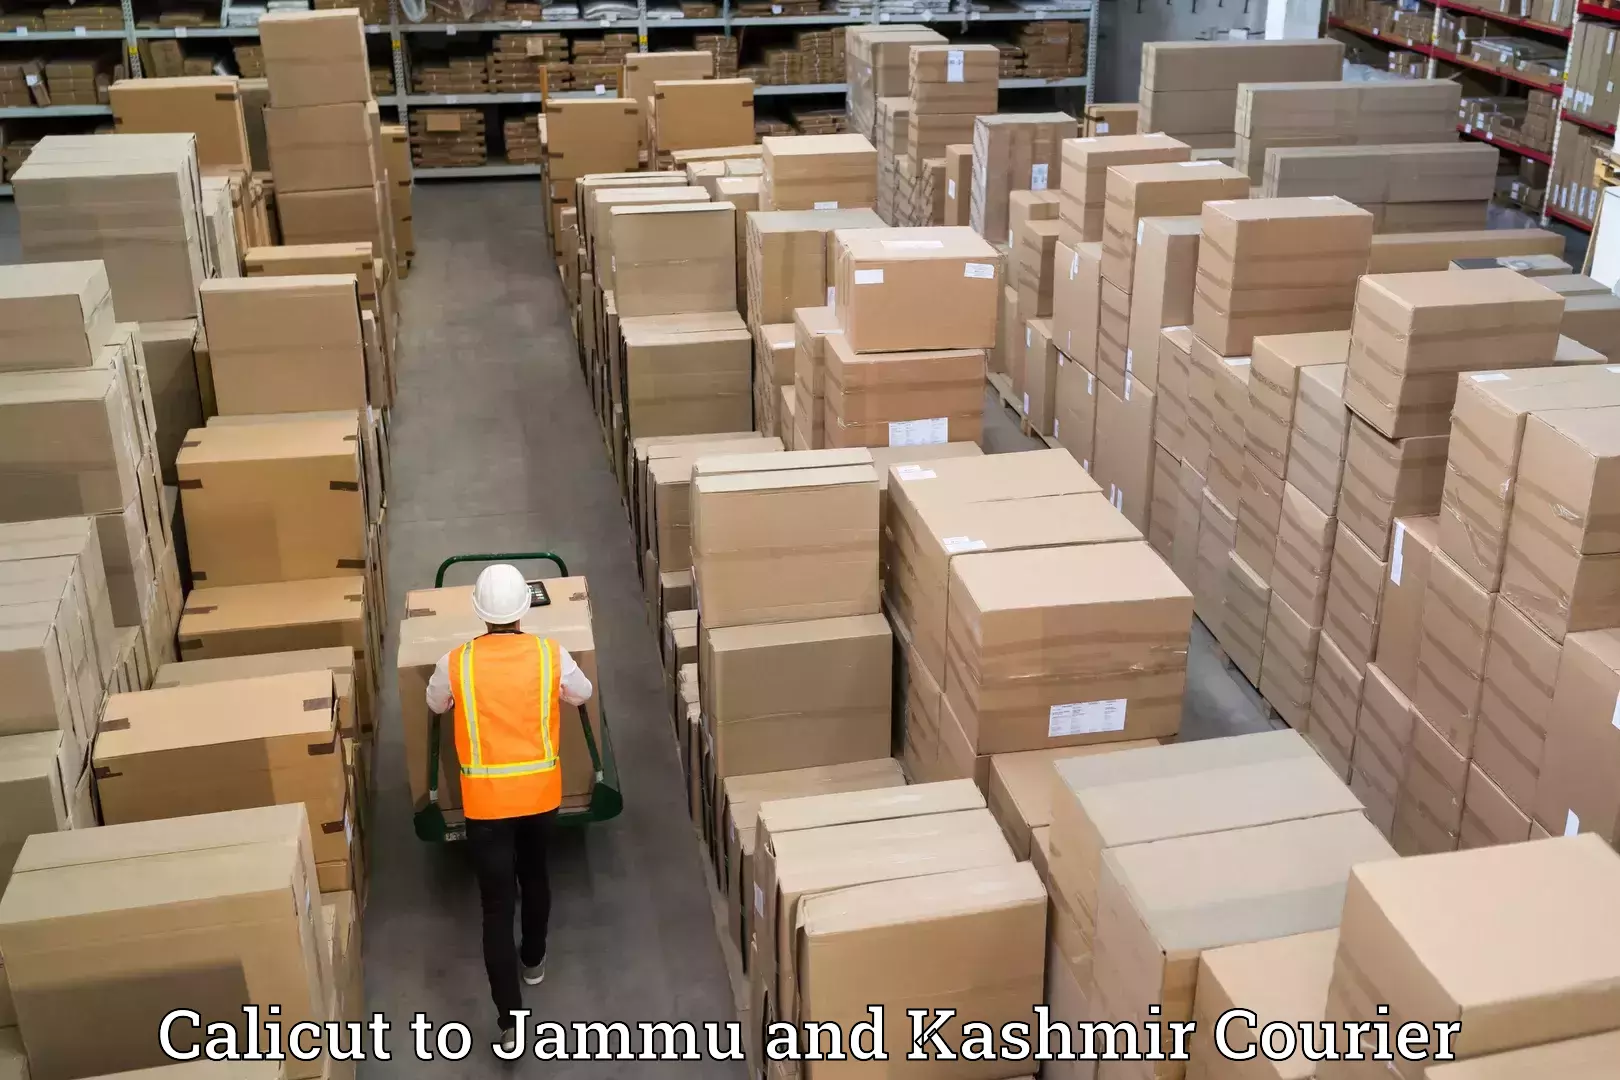 Moving and packing experts Calicut to Jammu and Kashmir